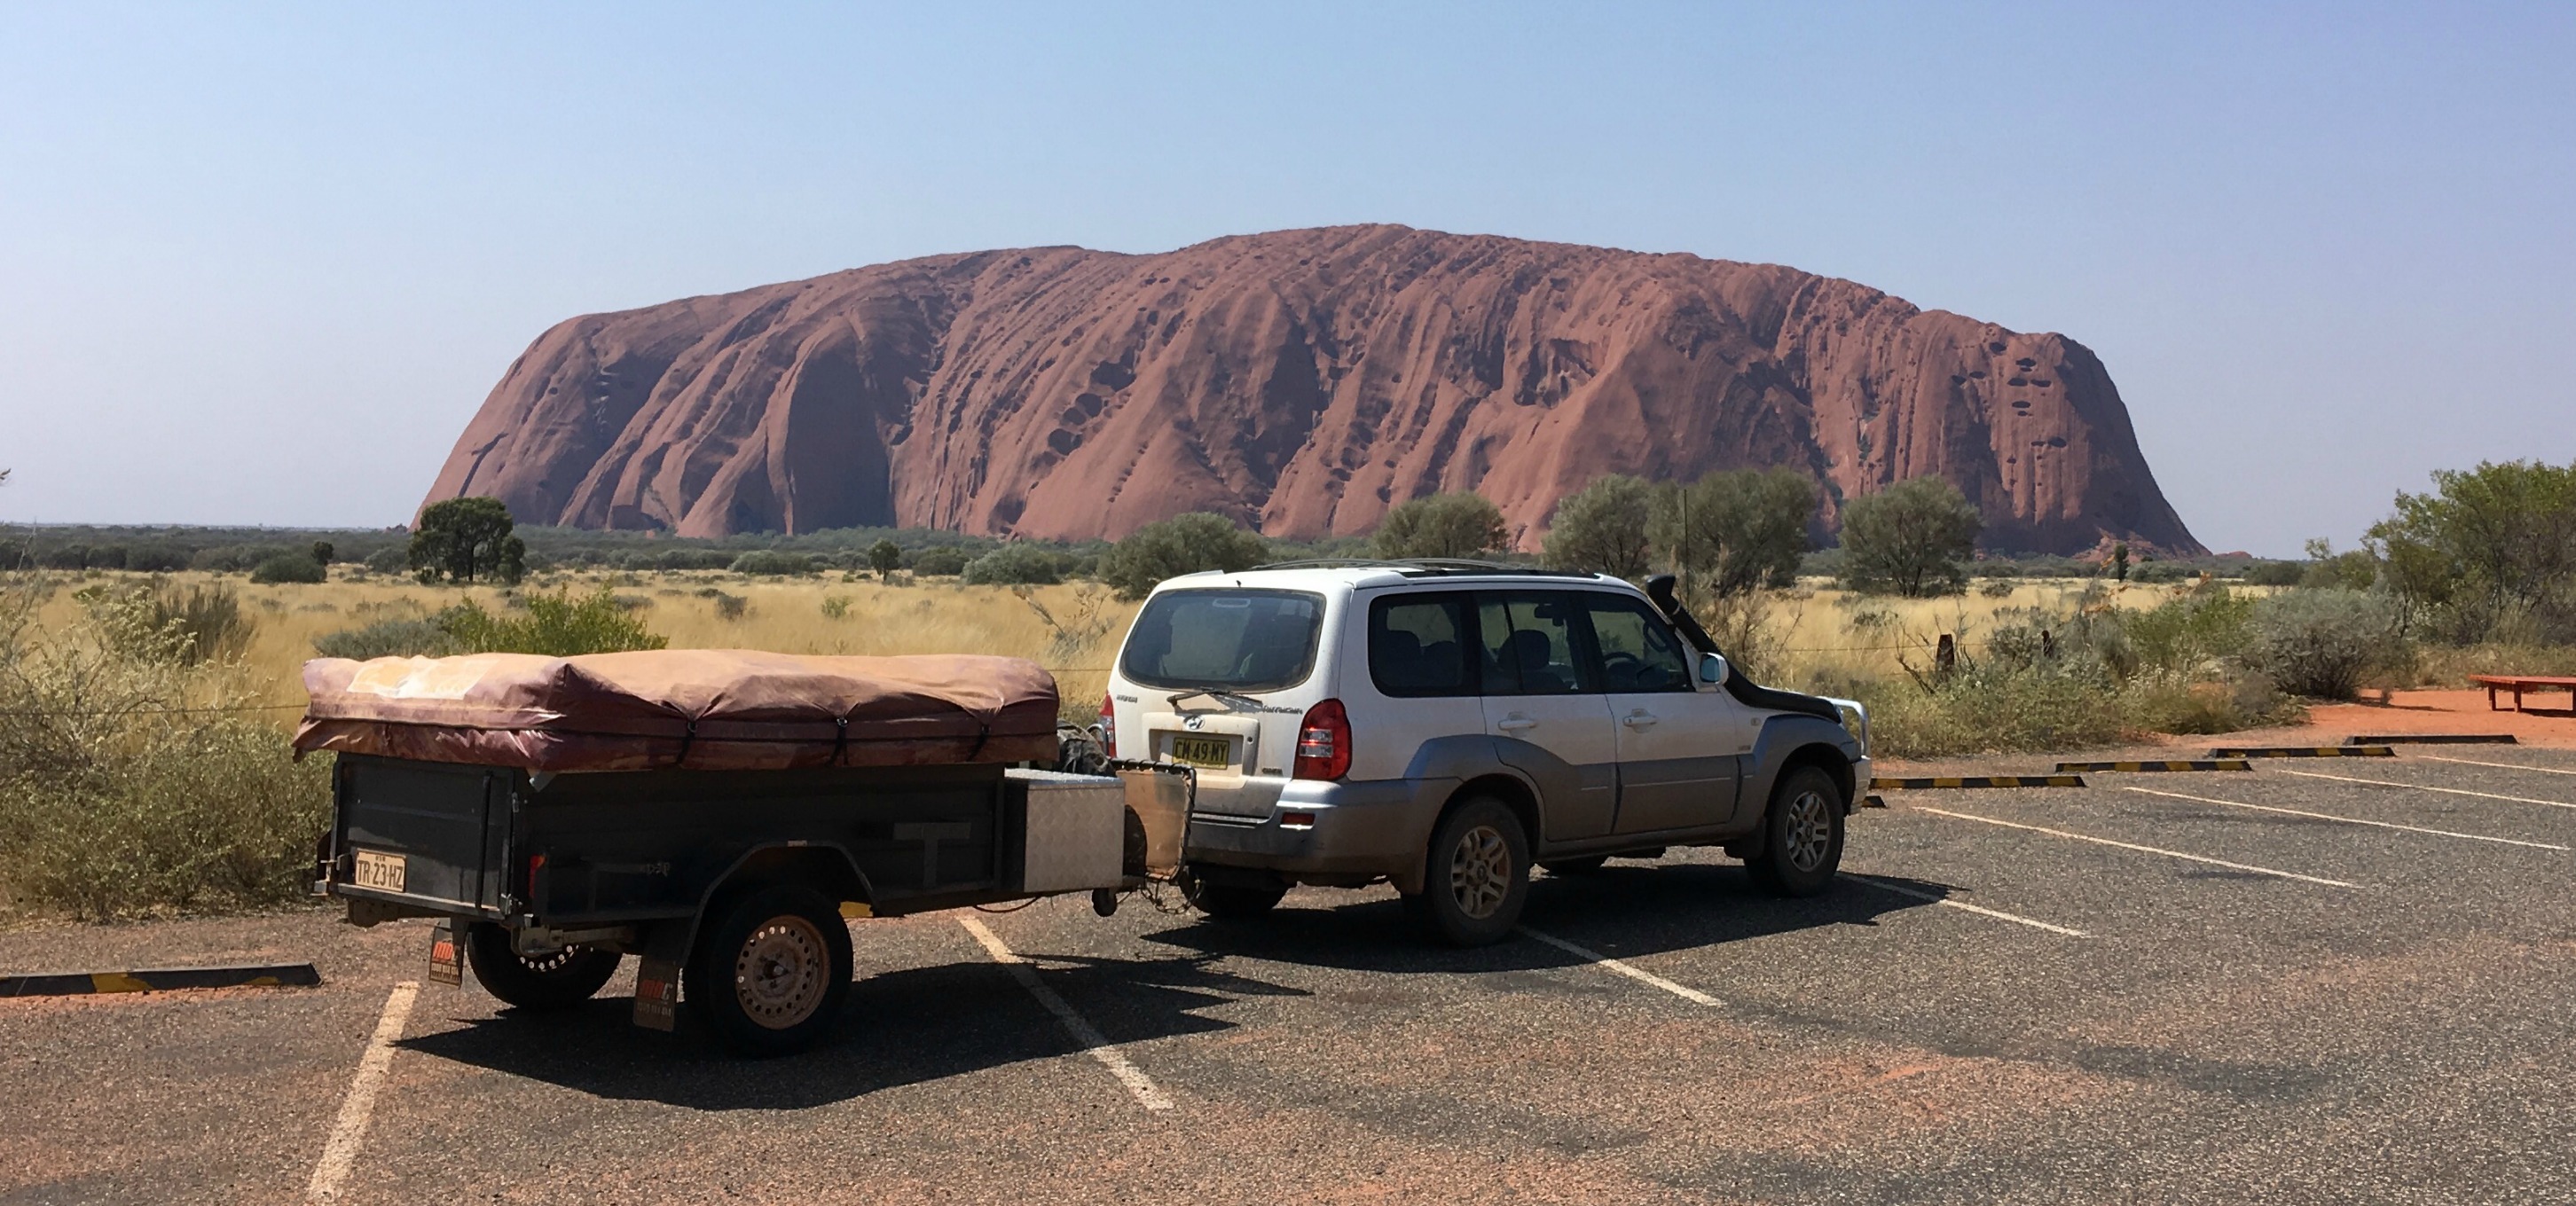 How to earn money while rving - our road trip around Australia - car and camper trailer at Uluru, Northern Territory, Australia